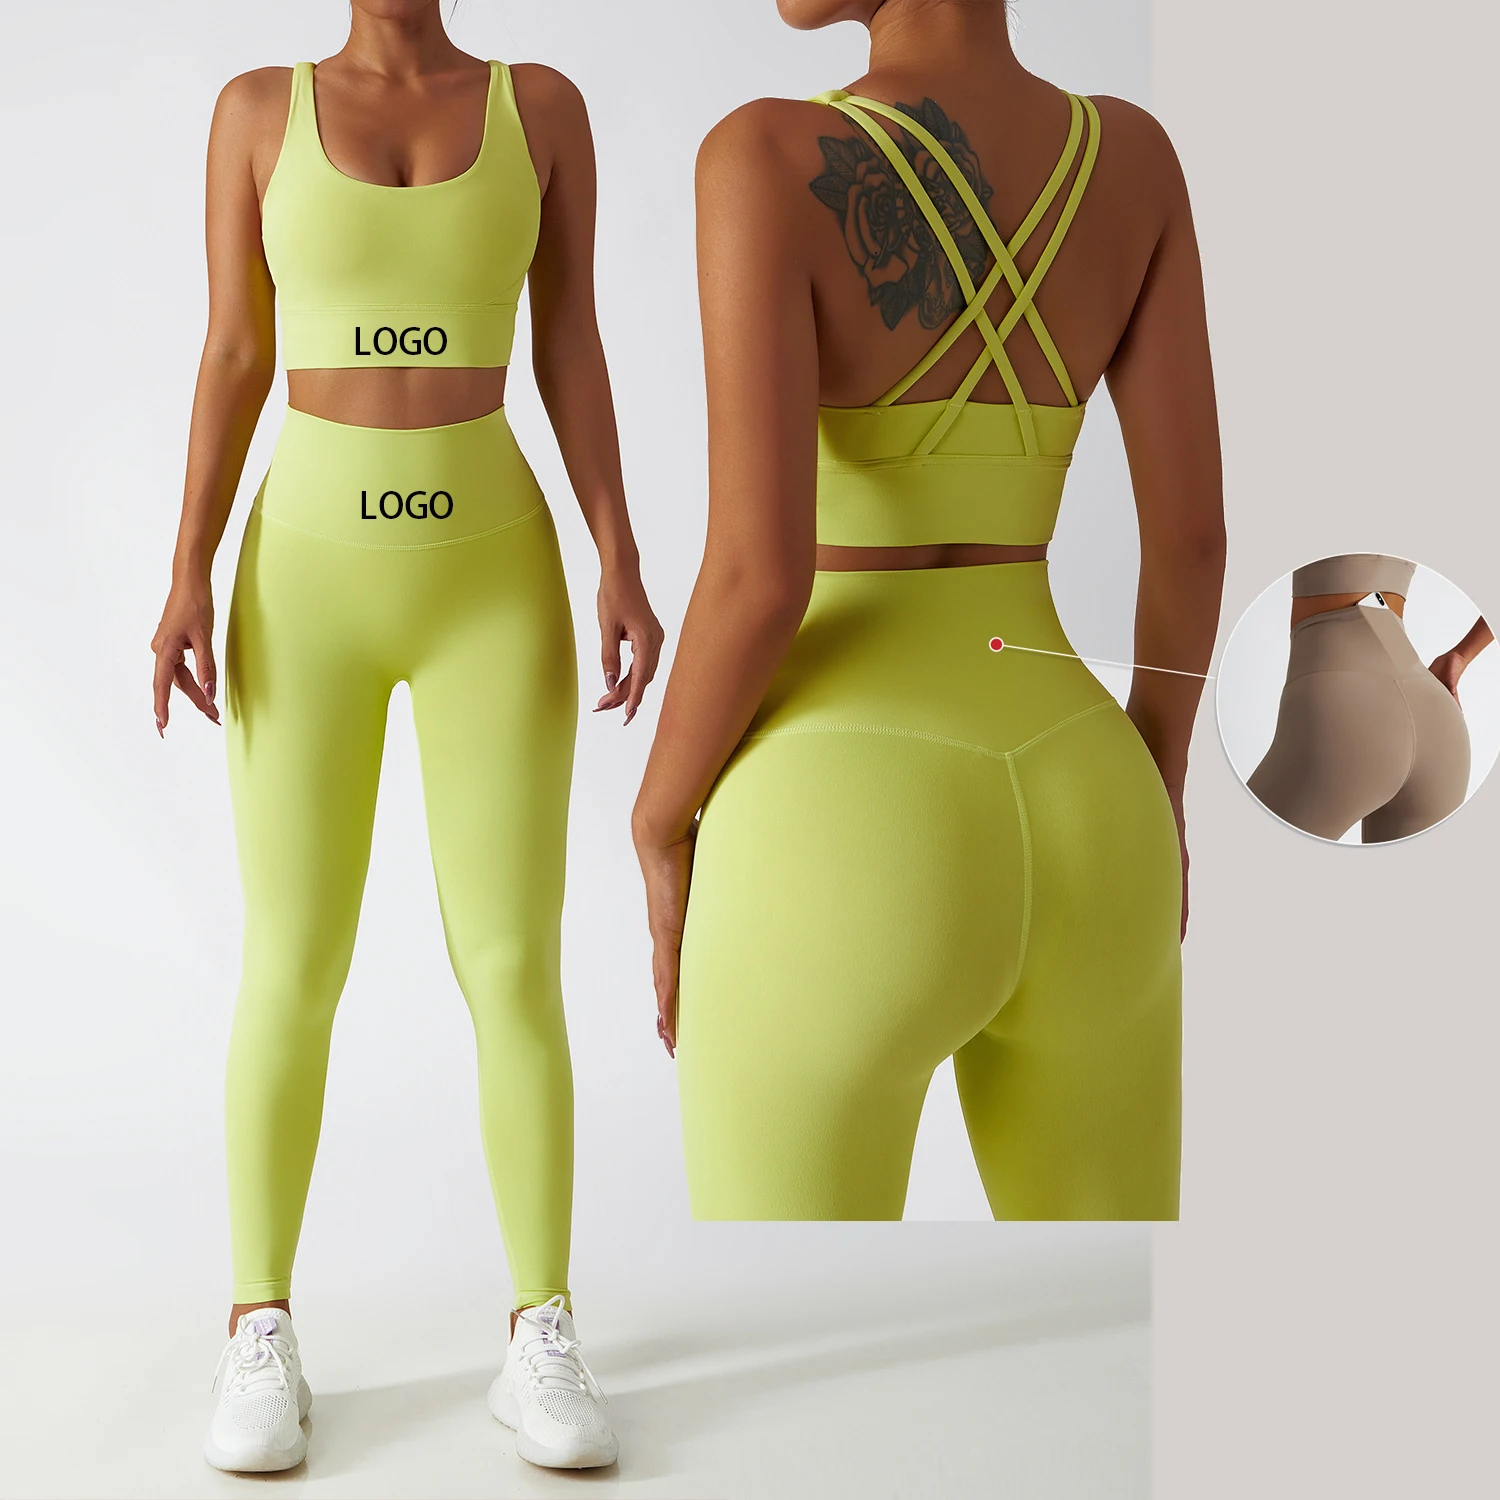 YIYI INS Soft Fabrics Butter Soft Yoga Suits Outdoor Training Workout Gym Fitness Sets Quick Dry Women Leggings Sets For Women